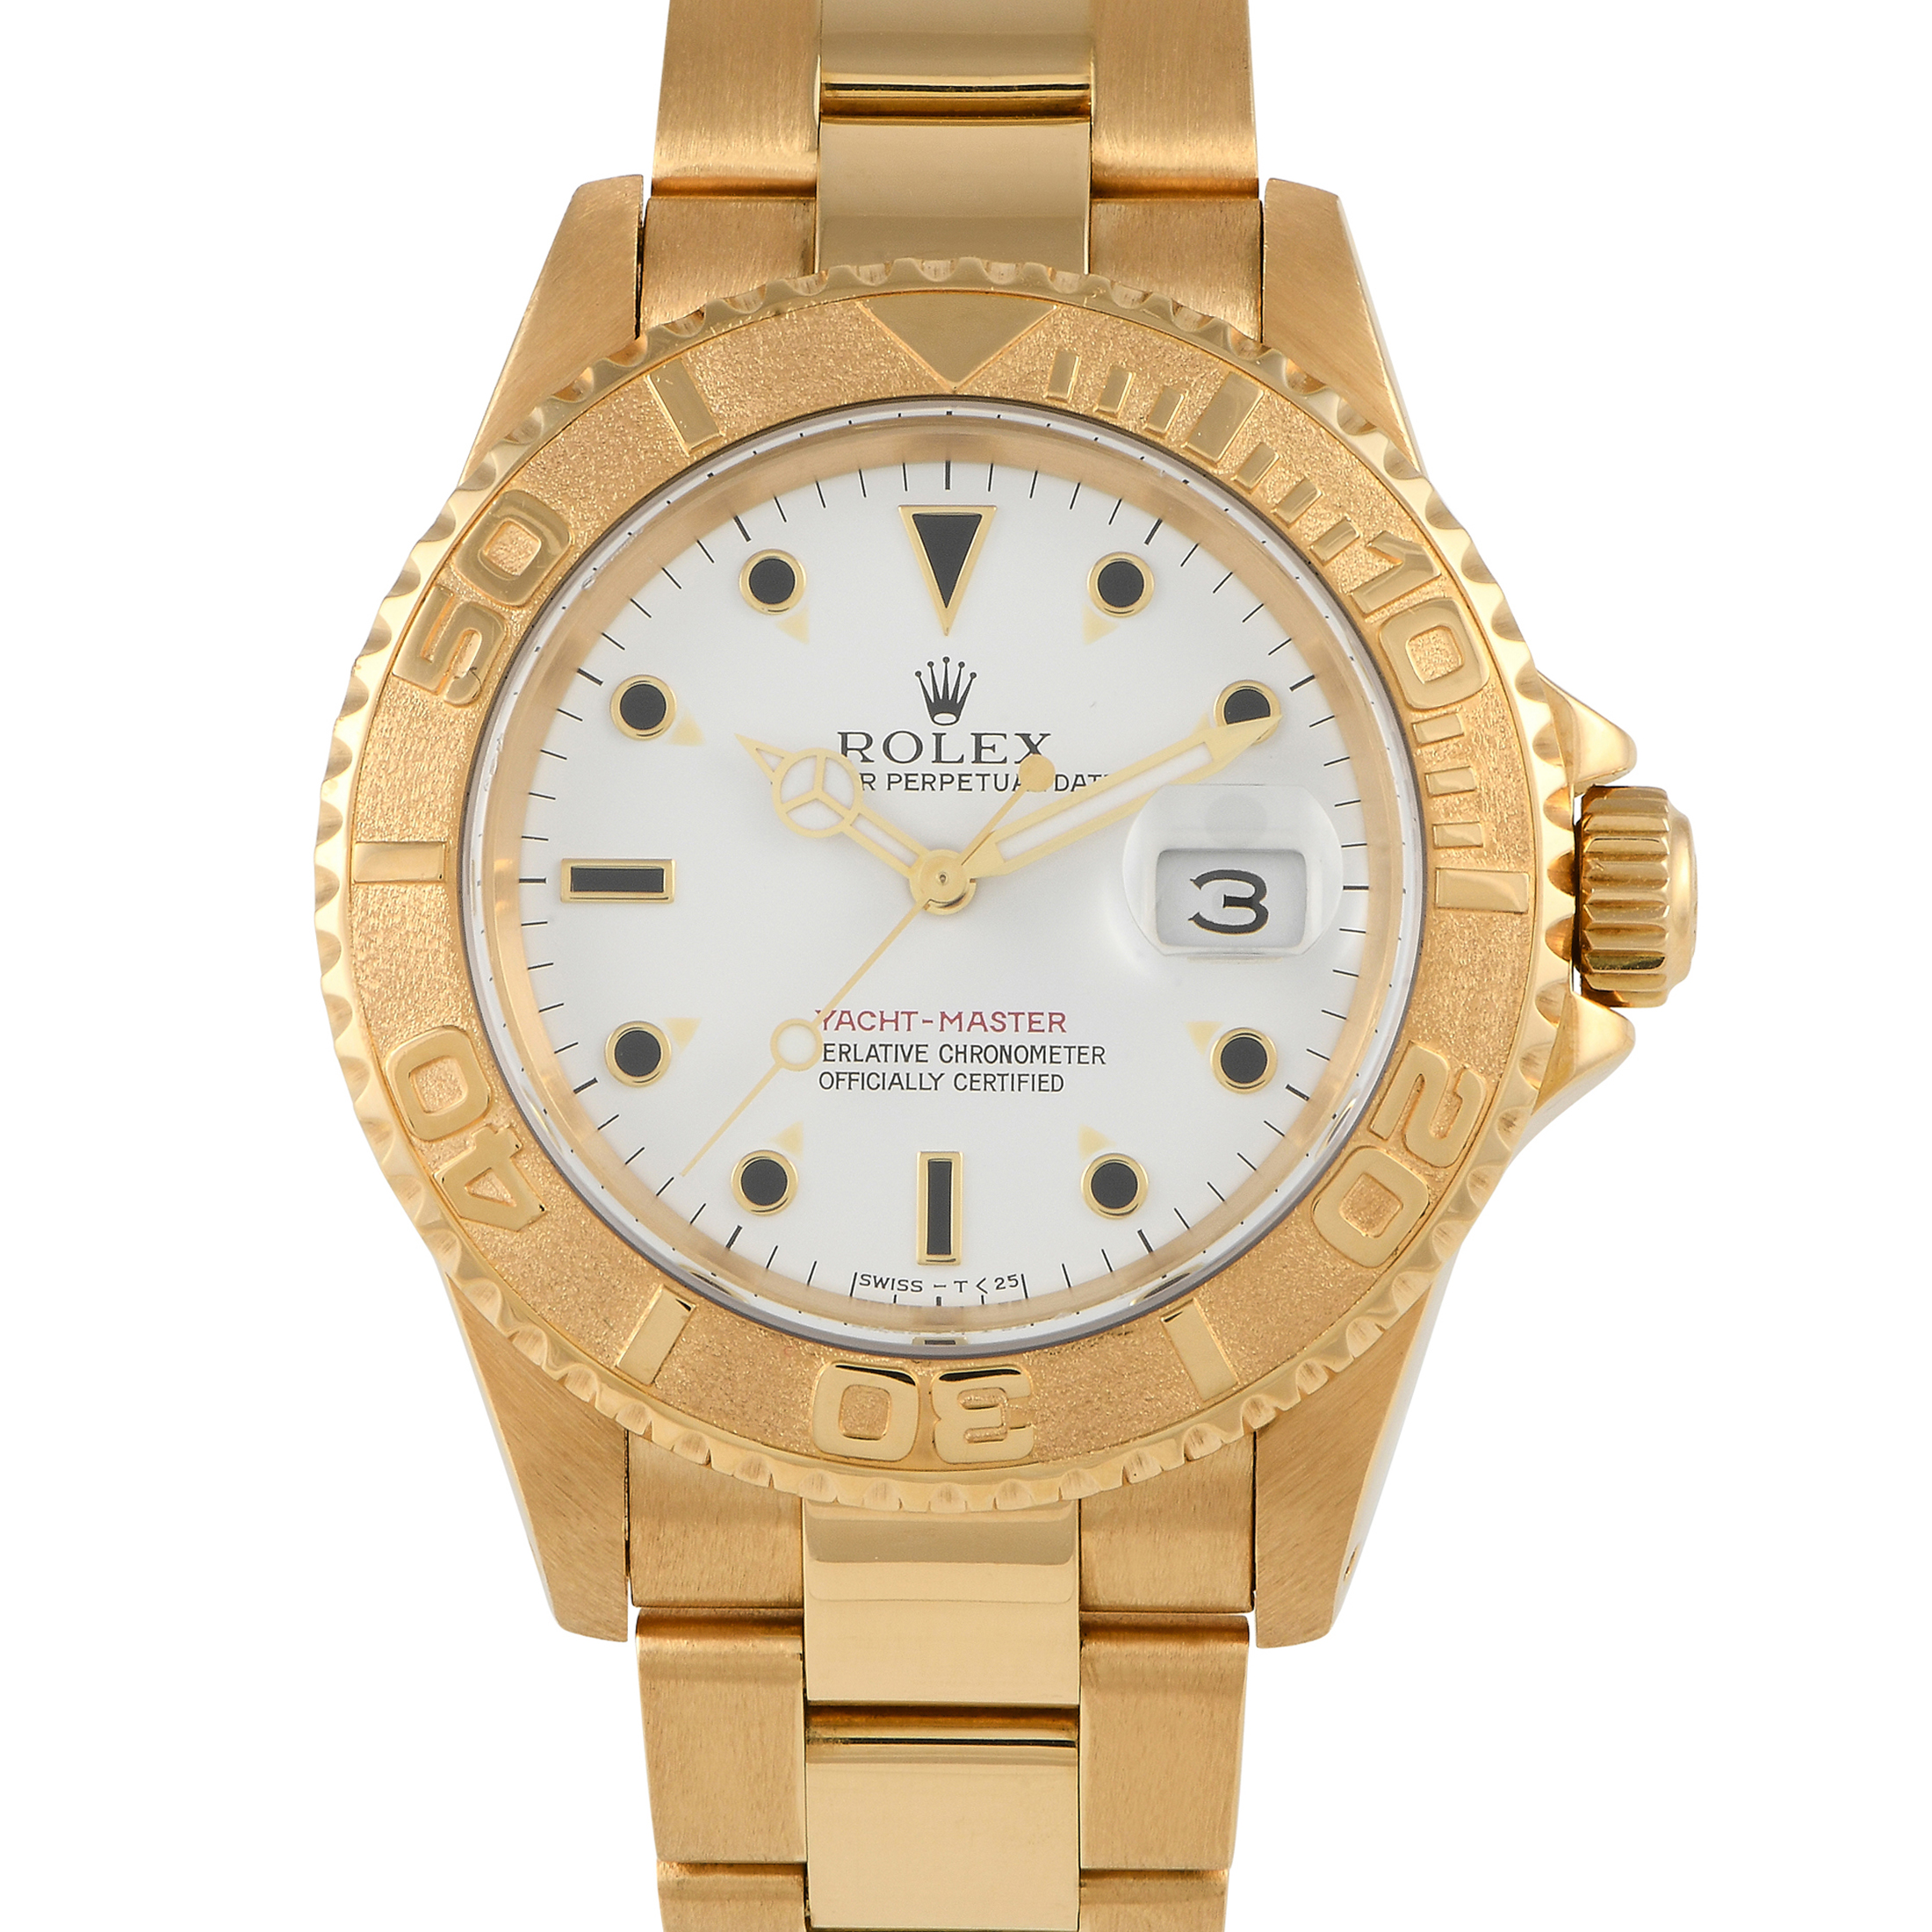 ROLEX 18K Yellow Gold 40mm YachtMaster Blue Dial 16628 Warranty